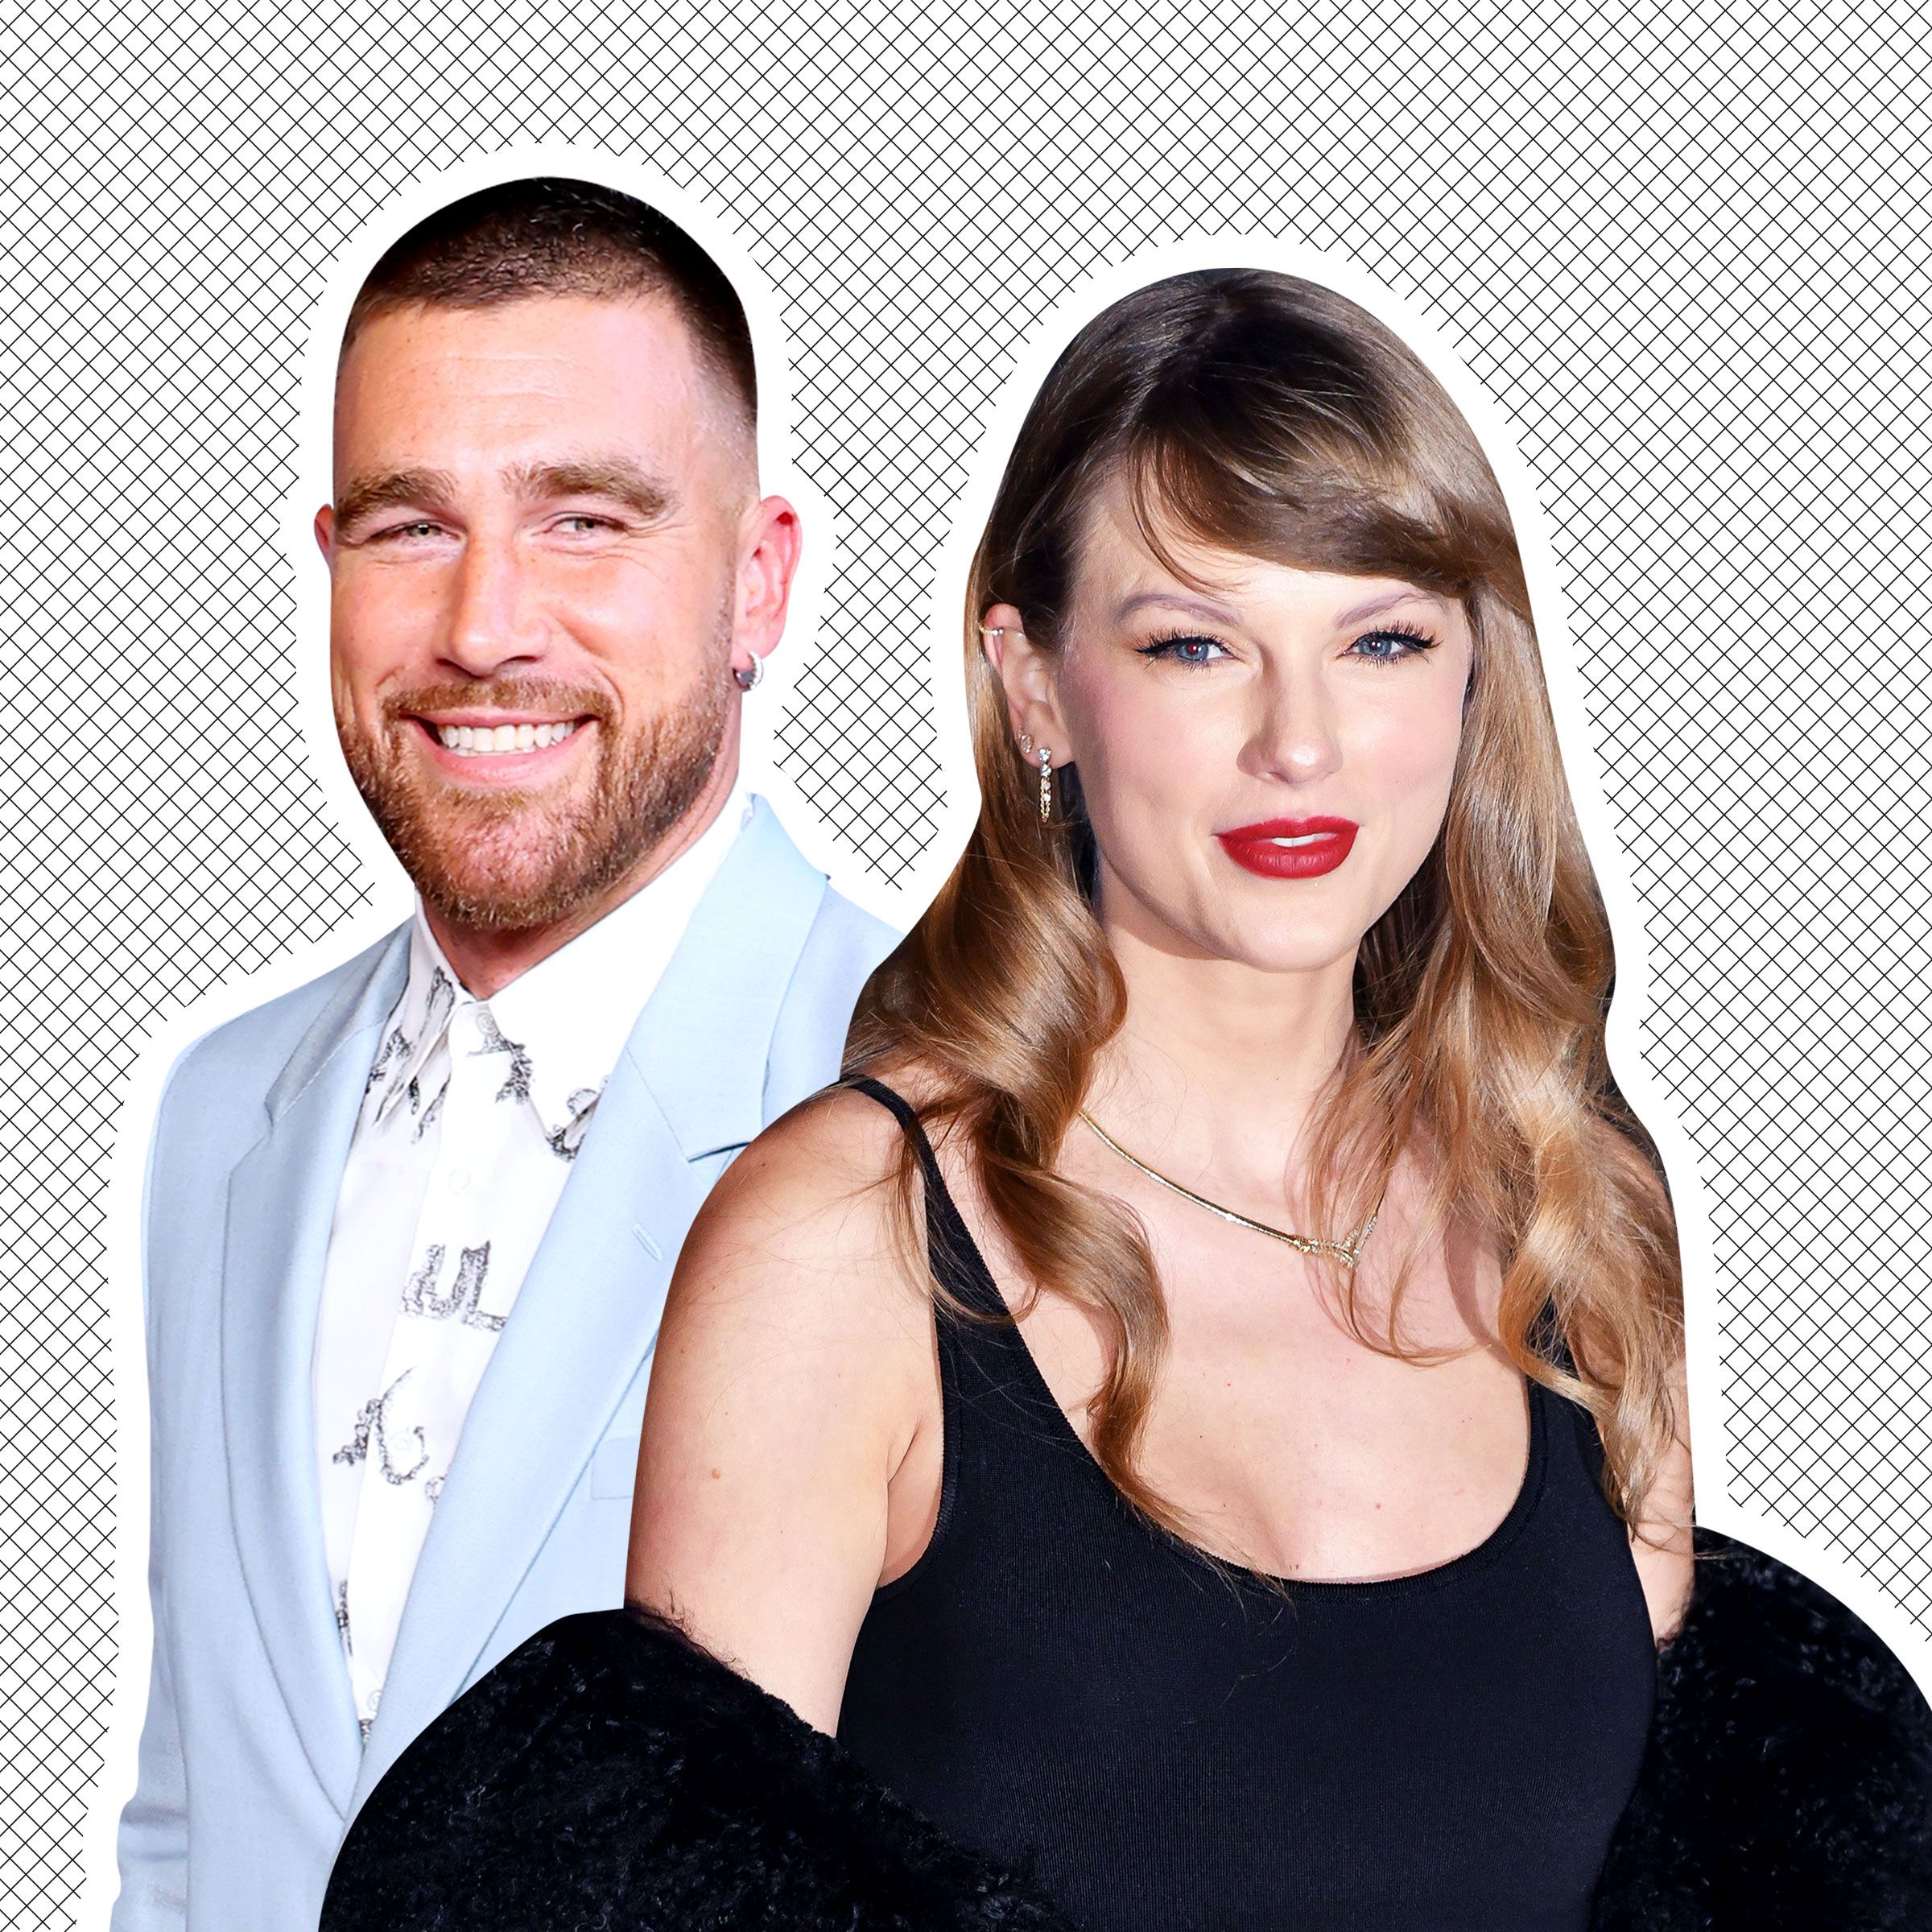 Taylor Swift's 34th Birthday Party and all the celebs that attended [PHOTOS]